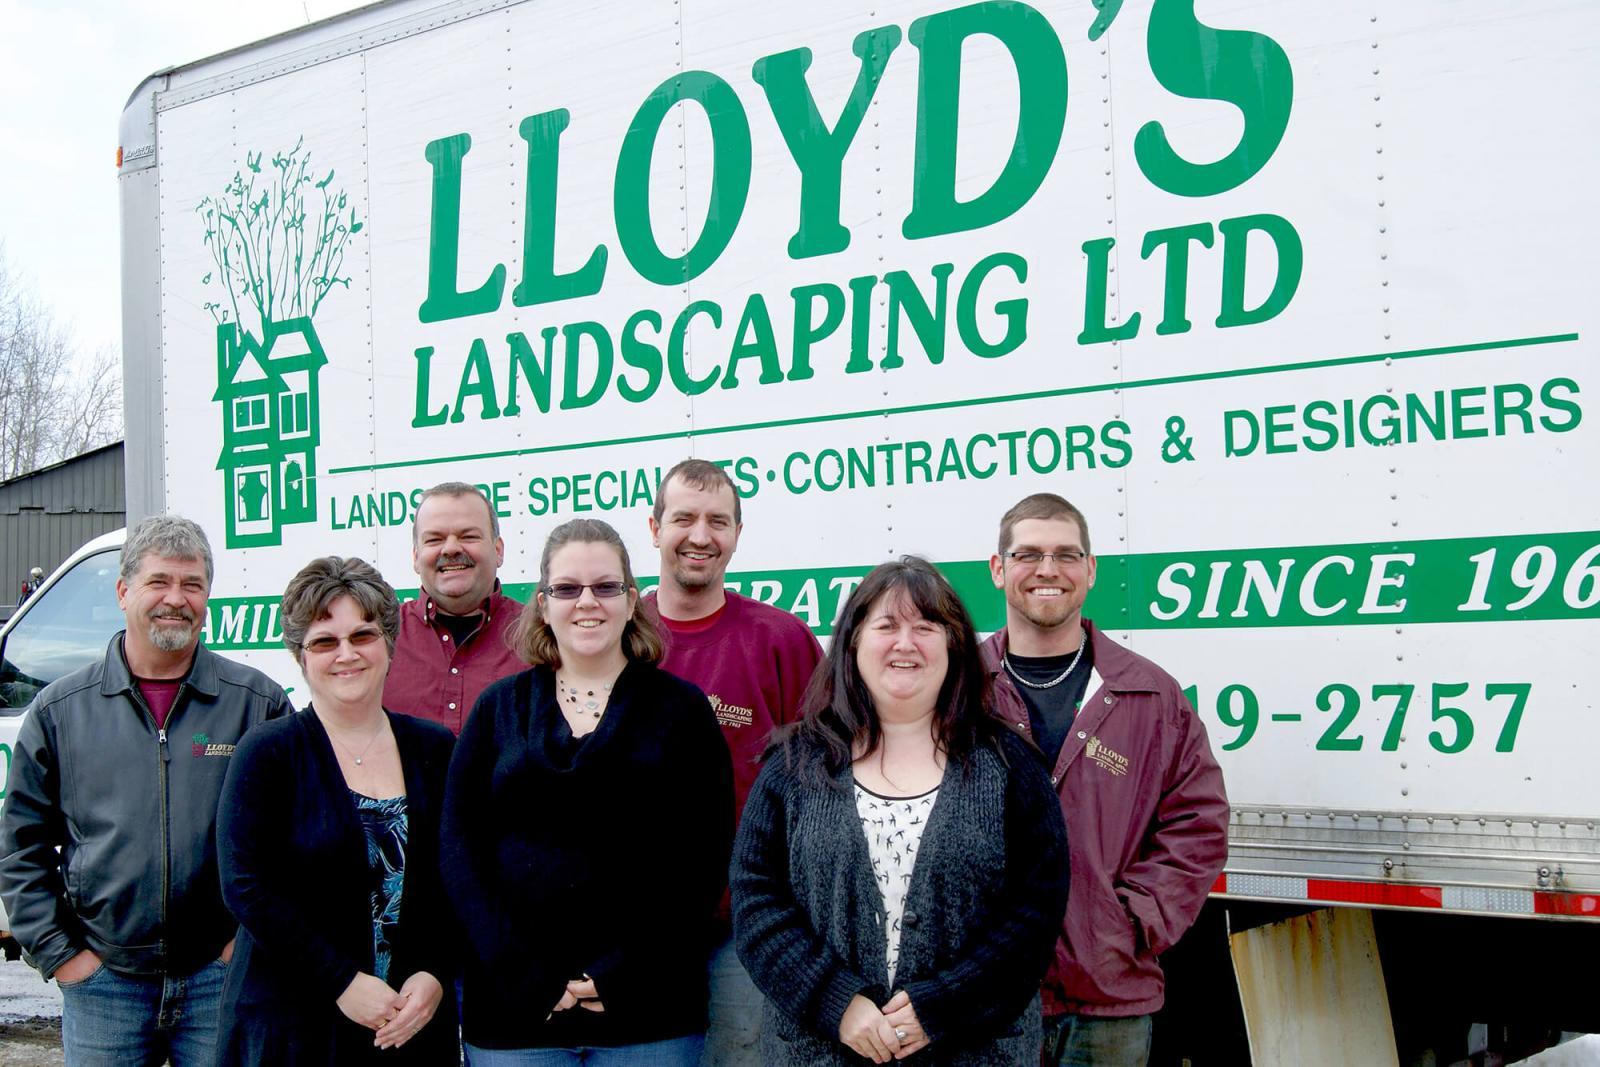 Family members who work to make Lloyd’s Landscaping a success. In front, from left, Kim Cotter, Stephanie Lemesurier and Louise Tyrrell, and in back, Paul Lloyd, Brian Cotter, Chris Lemesurier and Scott Lloyd. Absent are Rick Sr., who spends the winters in Florida, and Rick Jr.